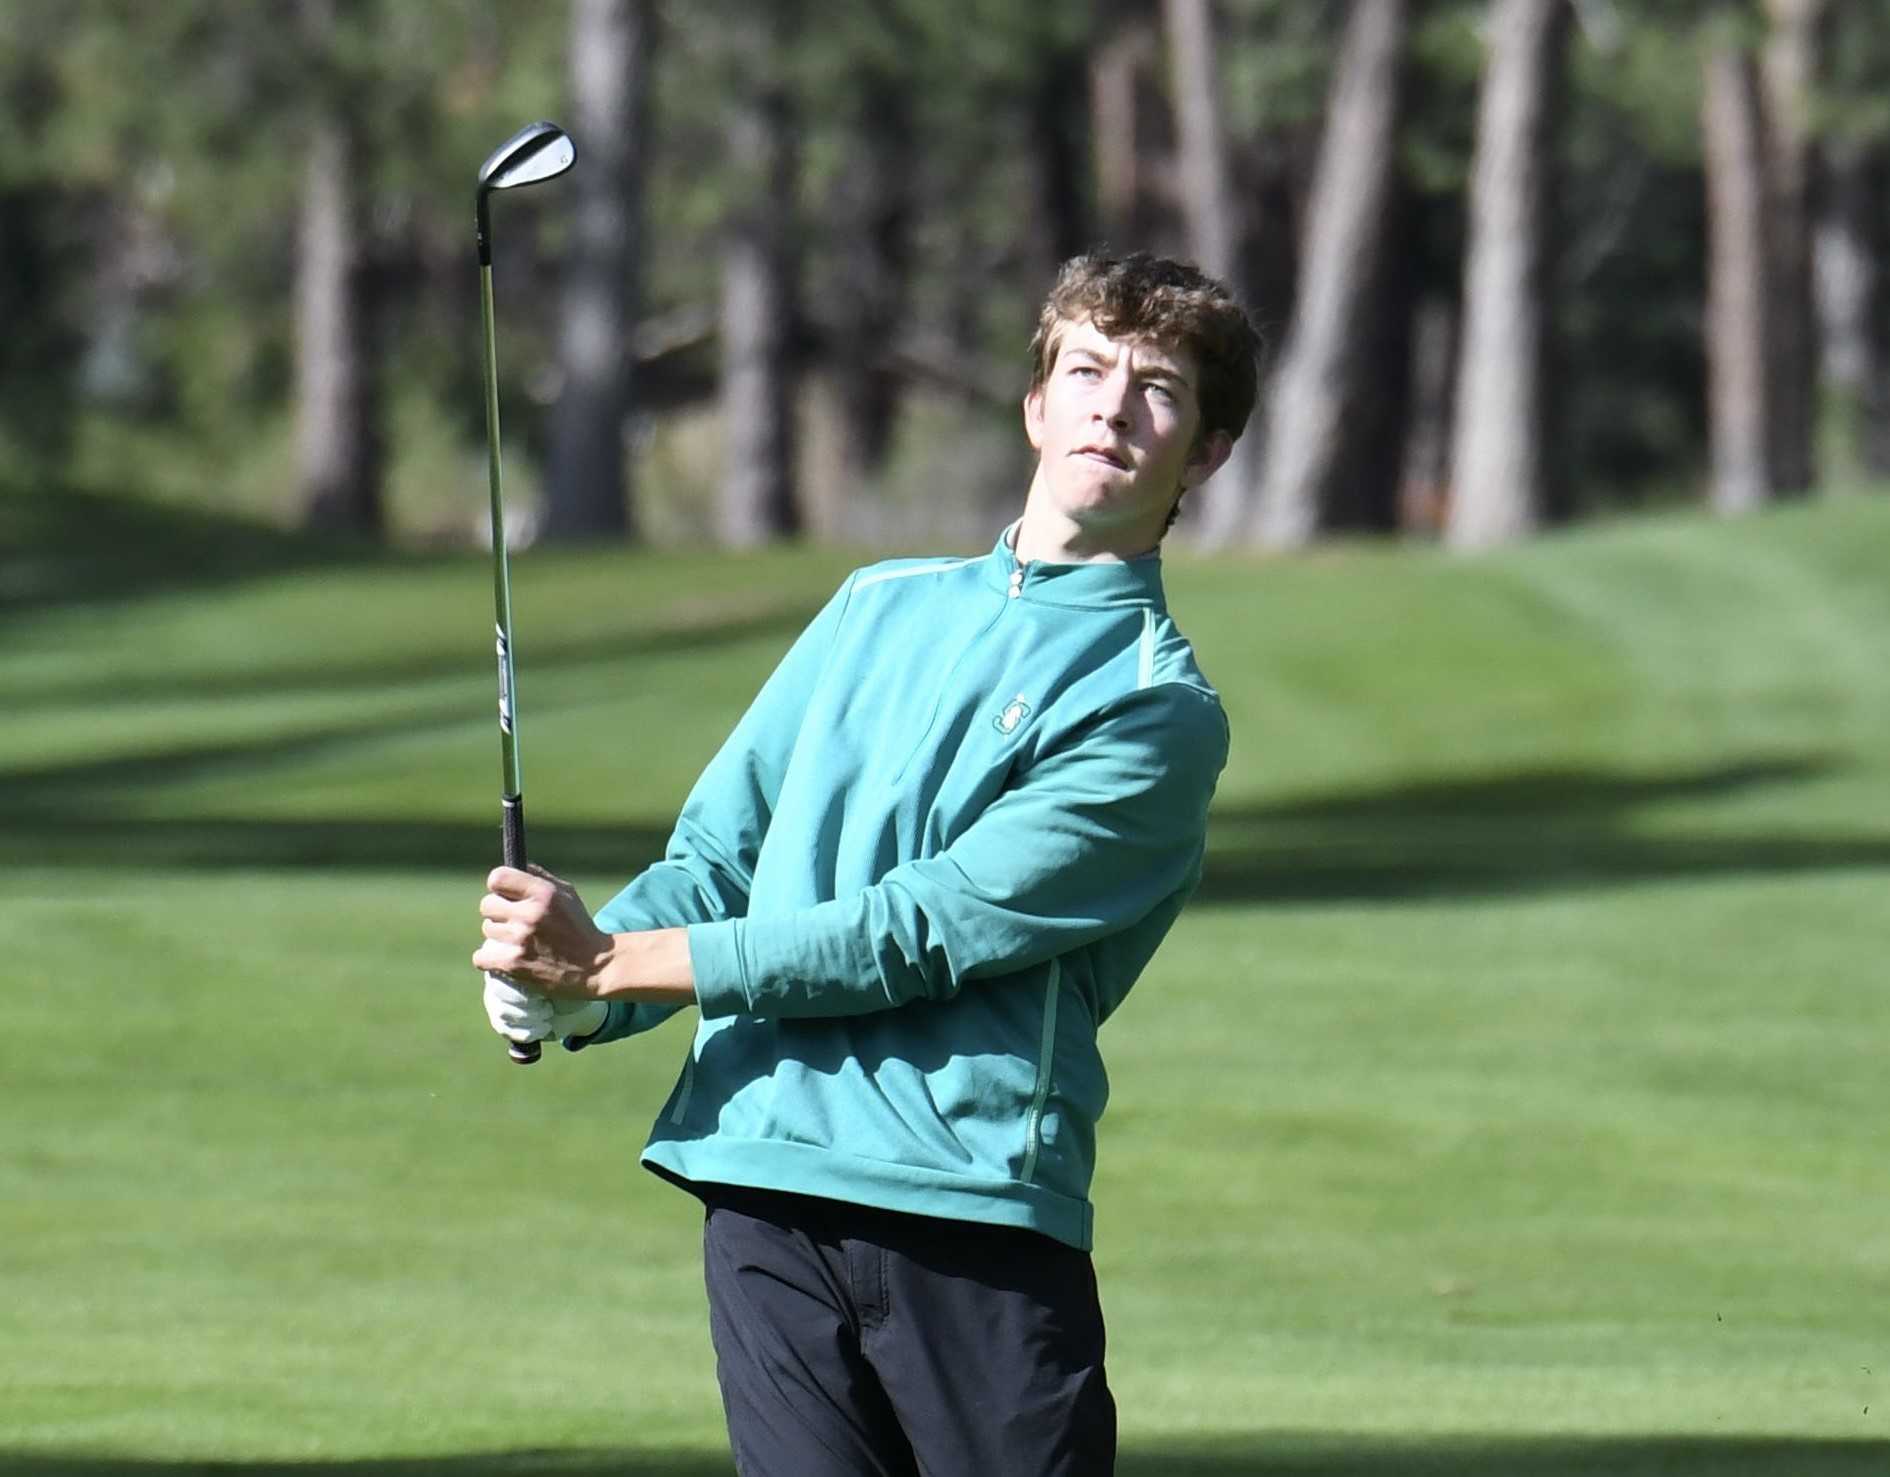 Summit senior Jakob Hansen was the medalist in the 5A State Preview tournament at Quail Valley. (Photo by Kris Cavin)